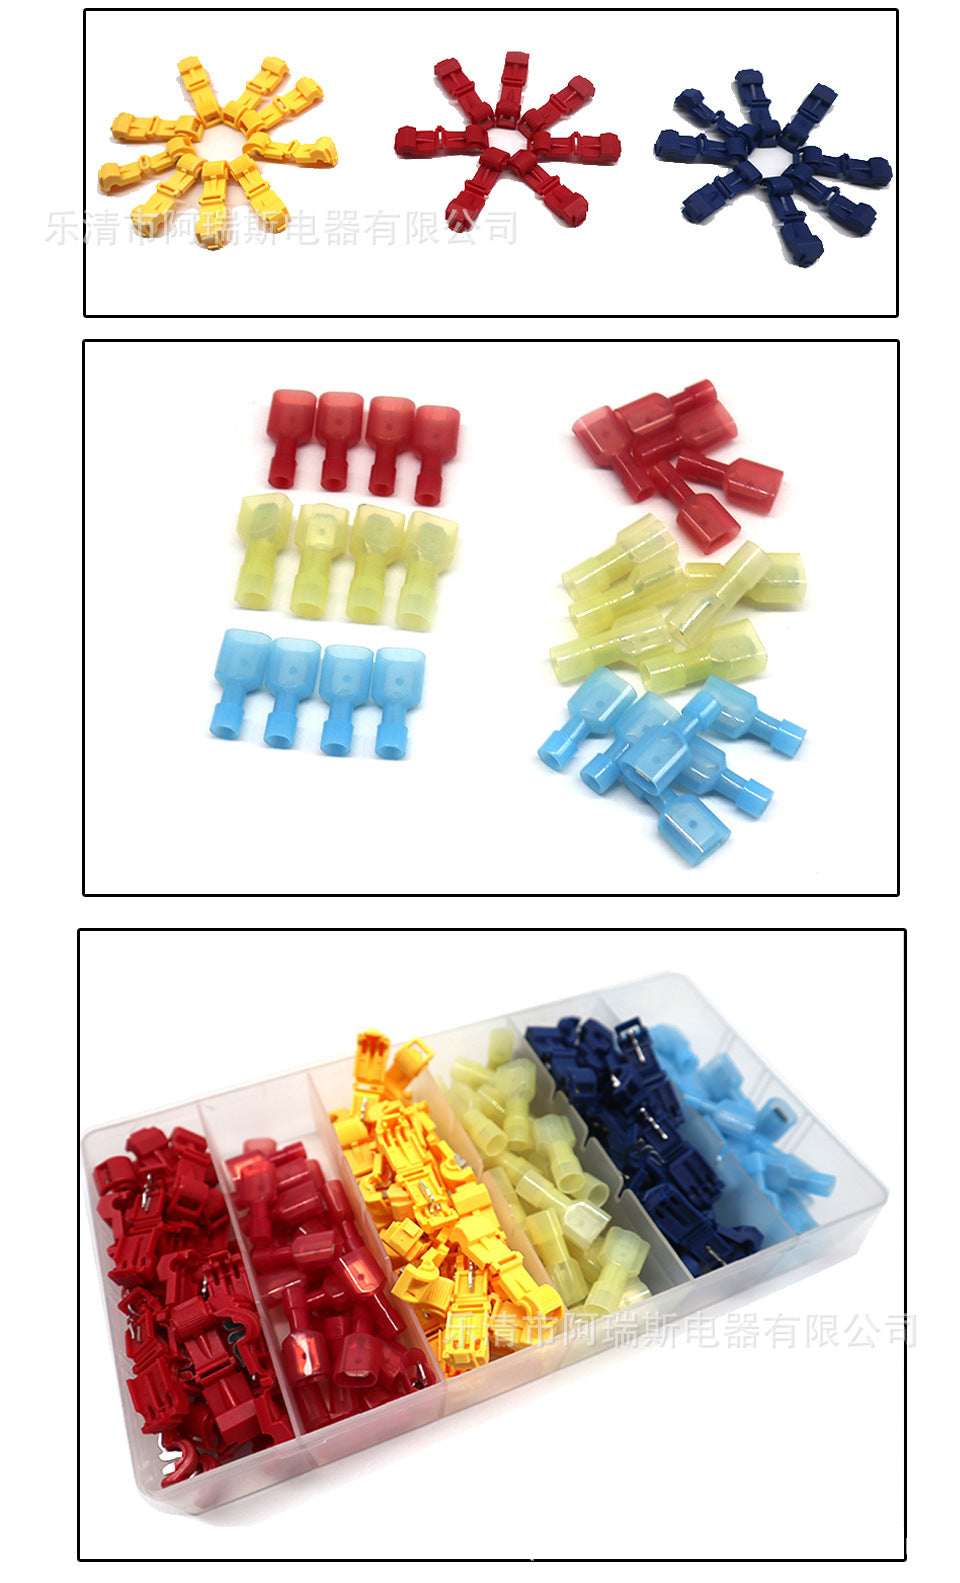 T-tap Wire Connectors Quick Splices 120PCS（(three colors mixed), Wire Terminals T Tap Self-Stripping Radio Wire Splice Terminals